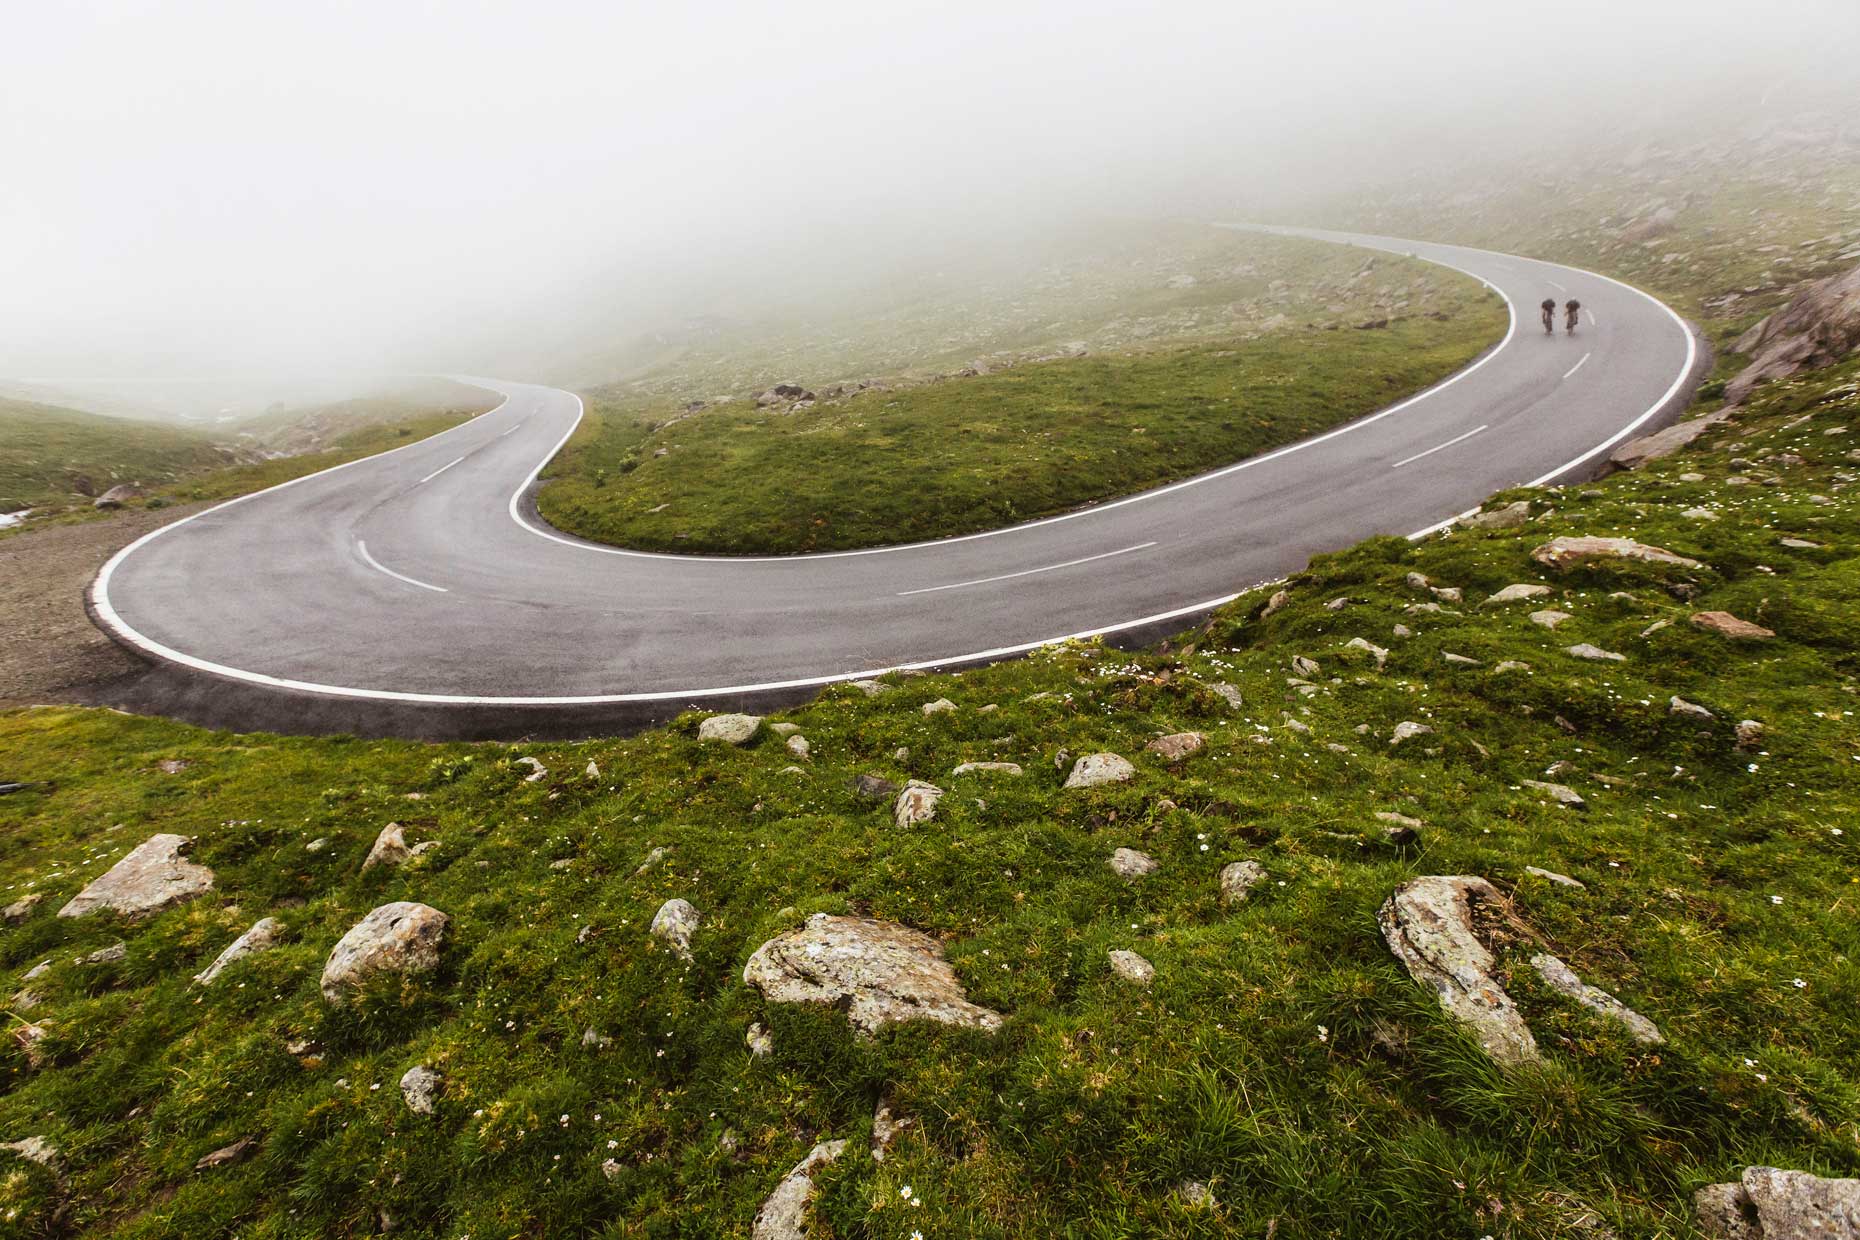 A single road cyclist riding downhill in foggy weather on the Timmelsjoch alpine road 